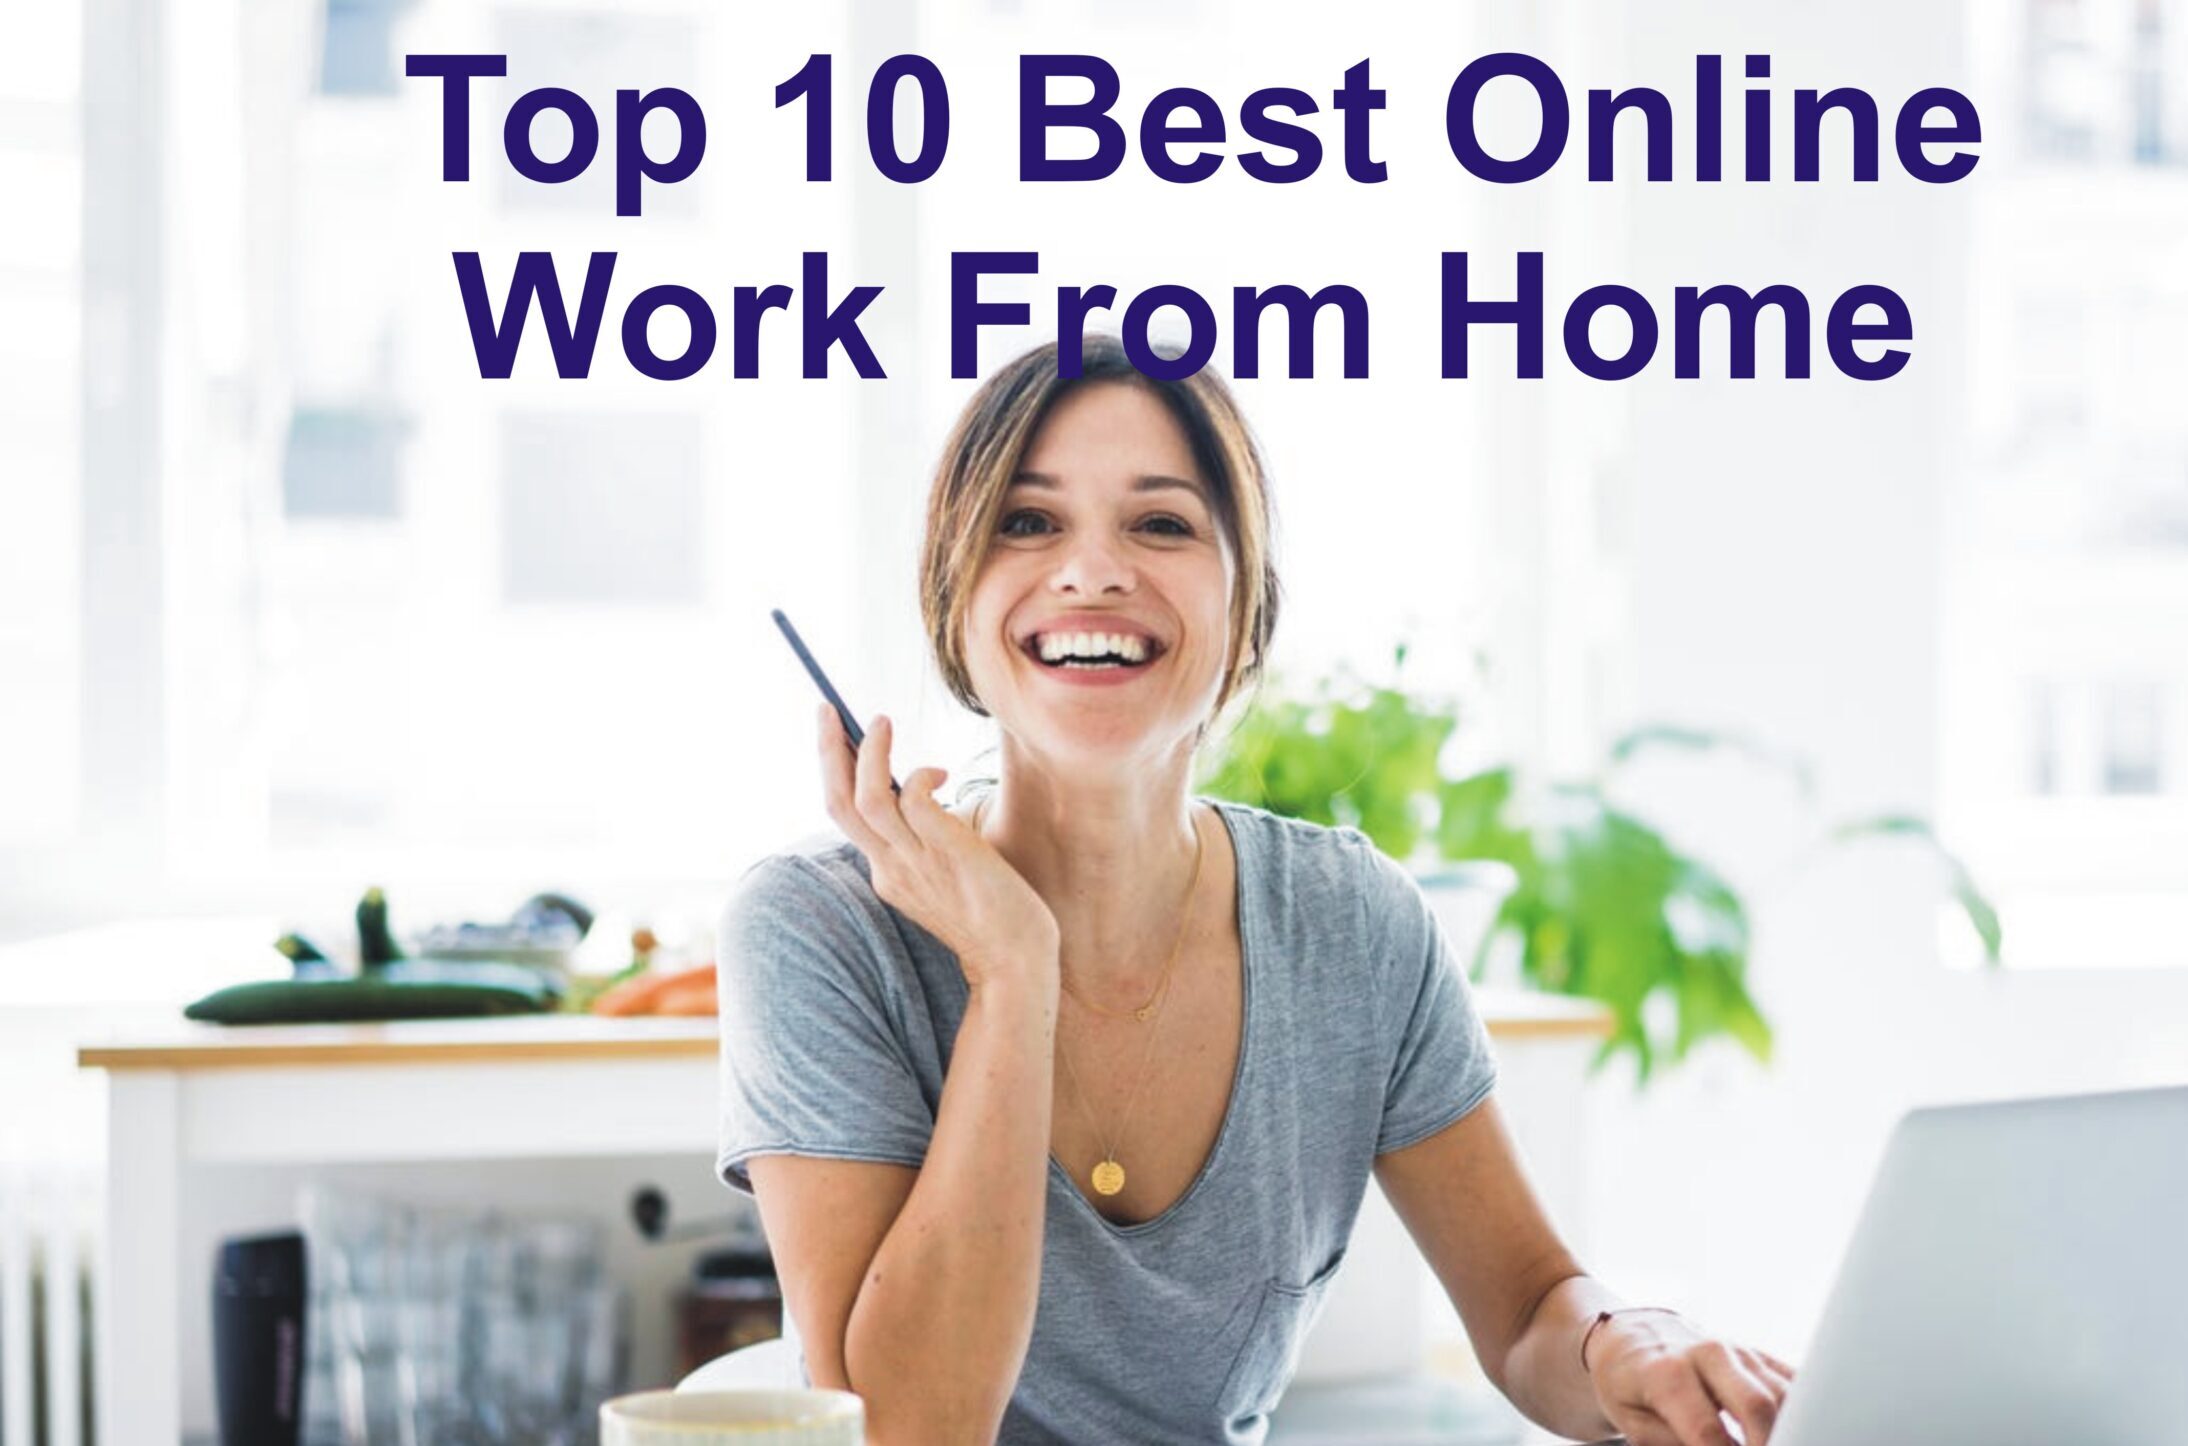 Top 10 Best Online Work From Home